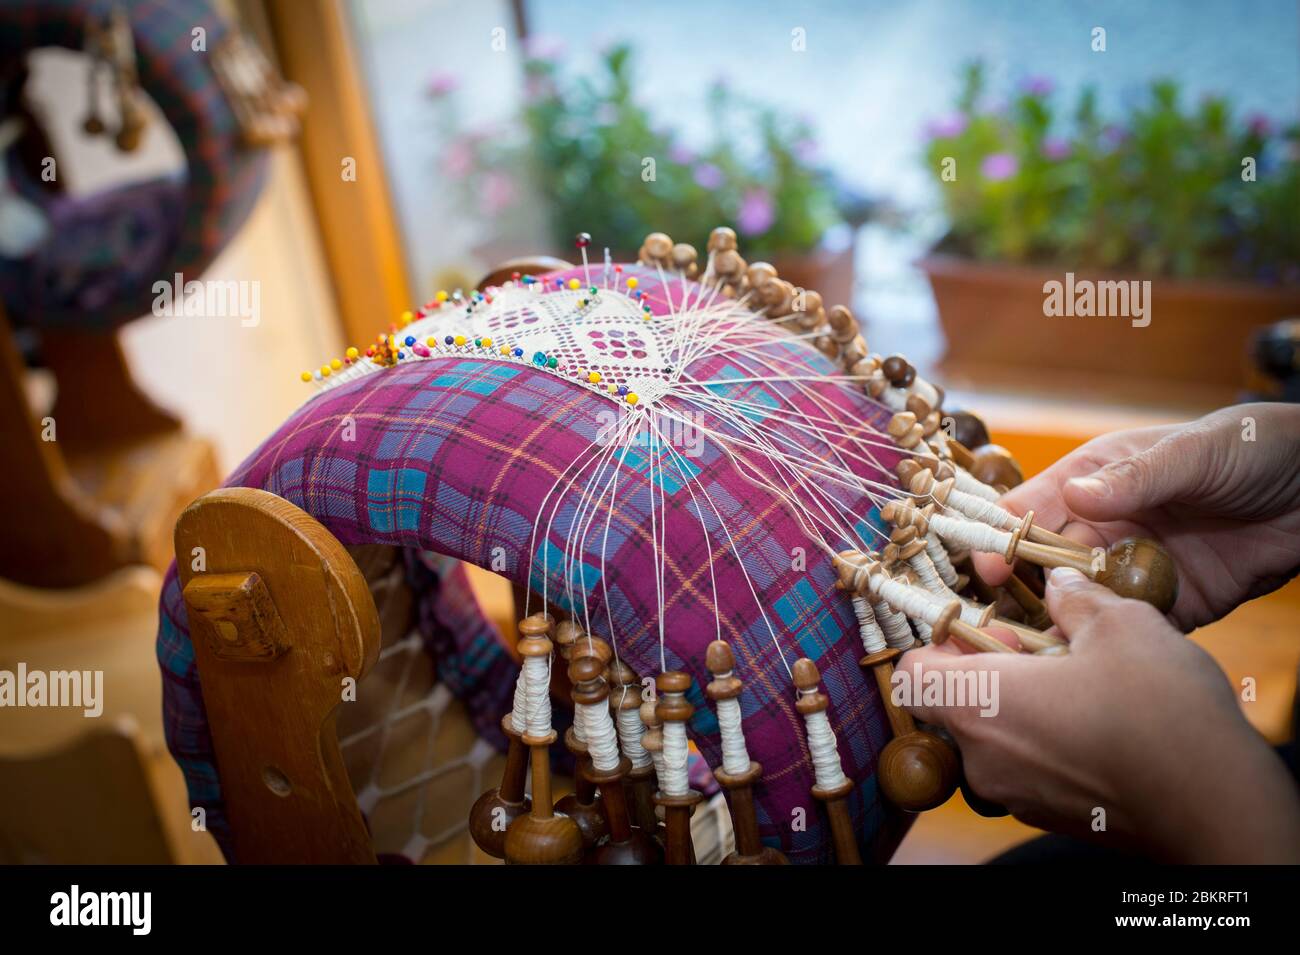 Italy, Aosta Valley, Cogne Valley, traditional crafts very alive: Cogne lace, tiles and shuttles are the tools necessary for the activity Stock Photo